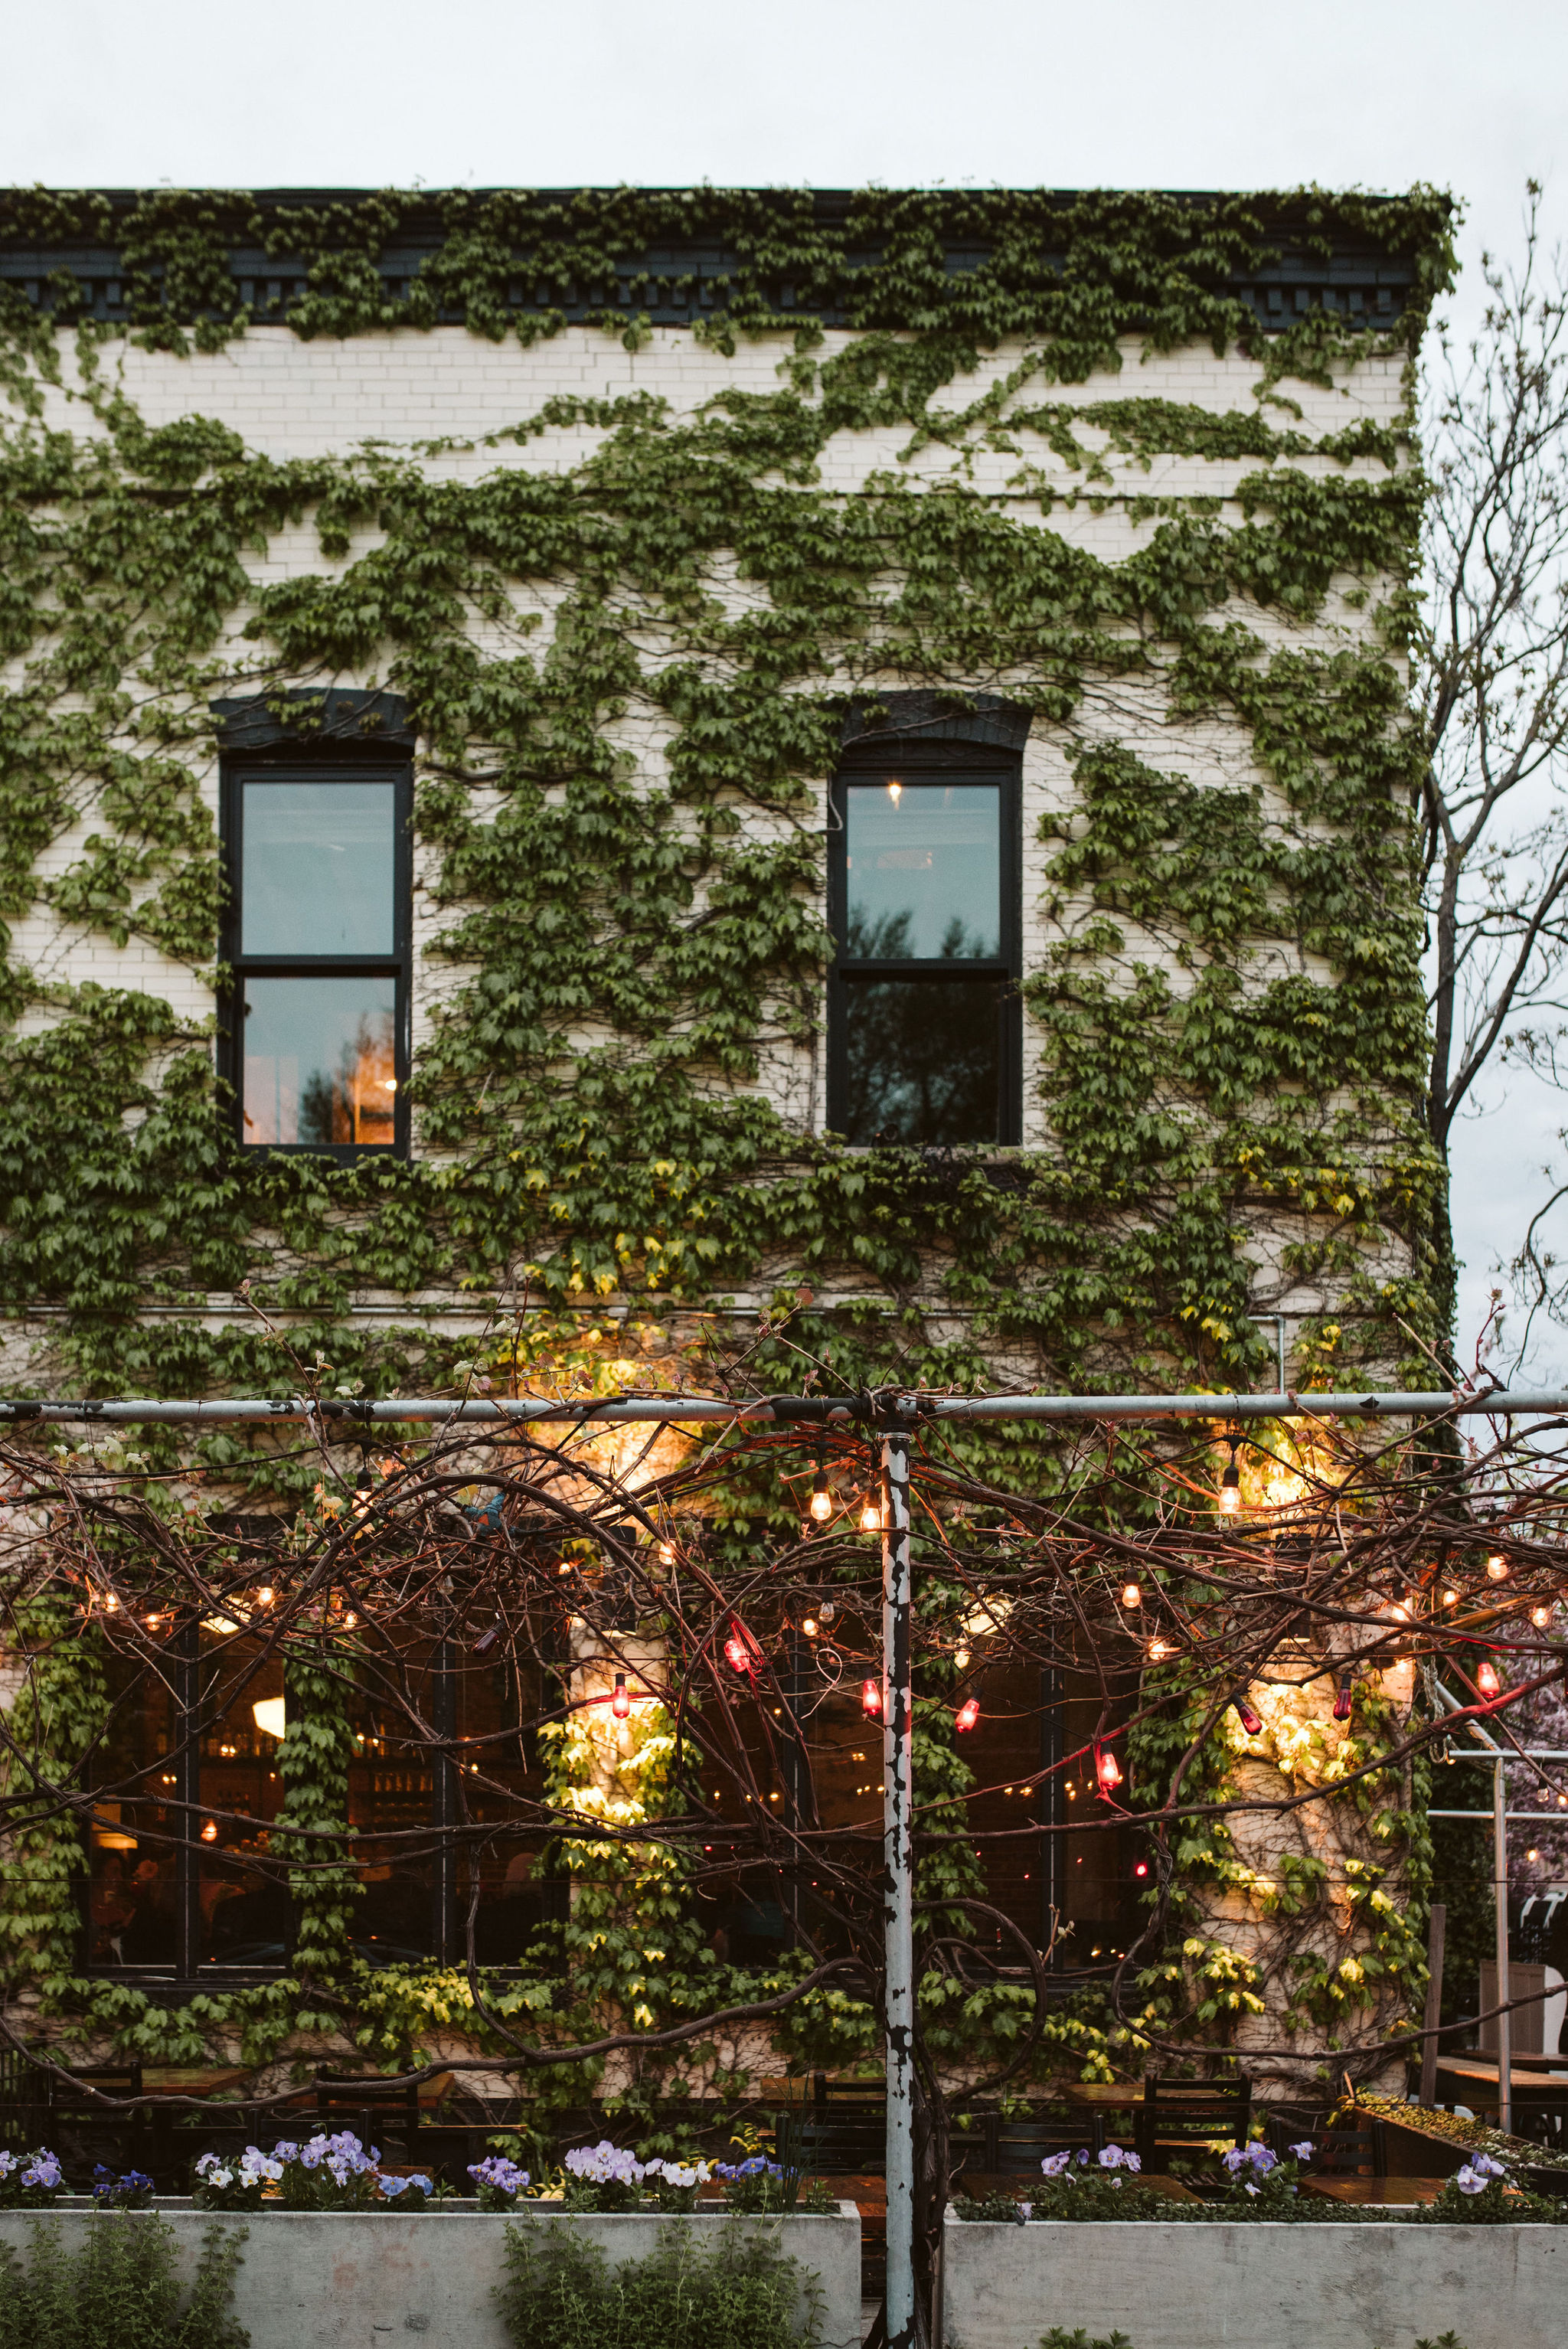  Washington DC, Baltimore Wedding Photographer, Intimate Wedding, Traditional, Classic, Big Bear Cafe, Exterior of Reception Venue Covered in Ivy 